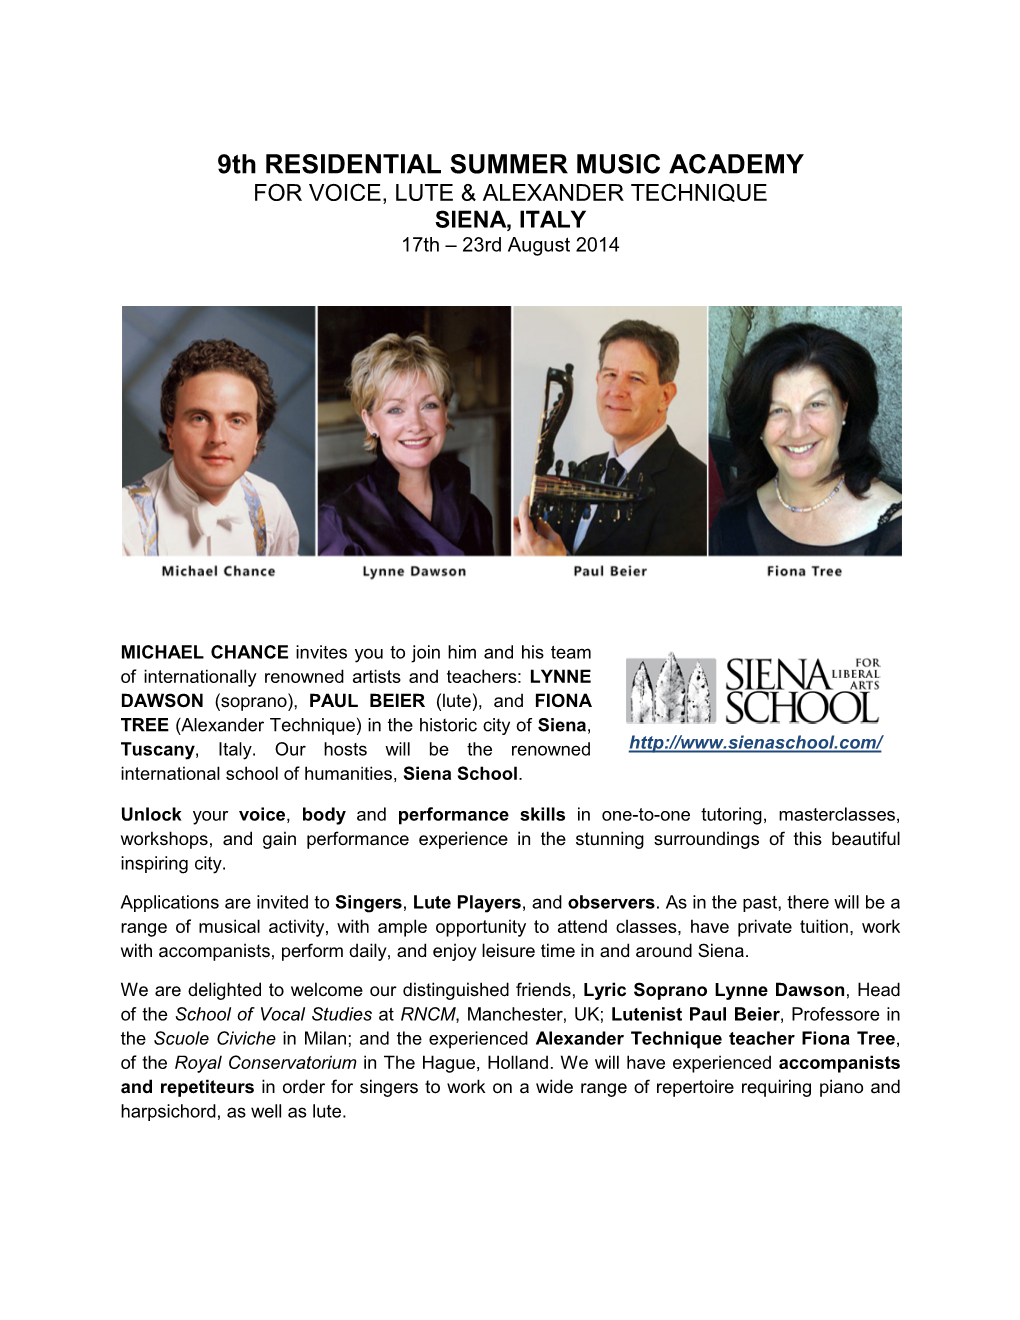 9Th RESIDENTIAL SUMMER MUSIC ACADEMY for VOICE, LUTE & ALEXANDER TECHNIQUE SIENA, ITALY 17Th – 23Rd August 2014